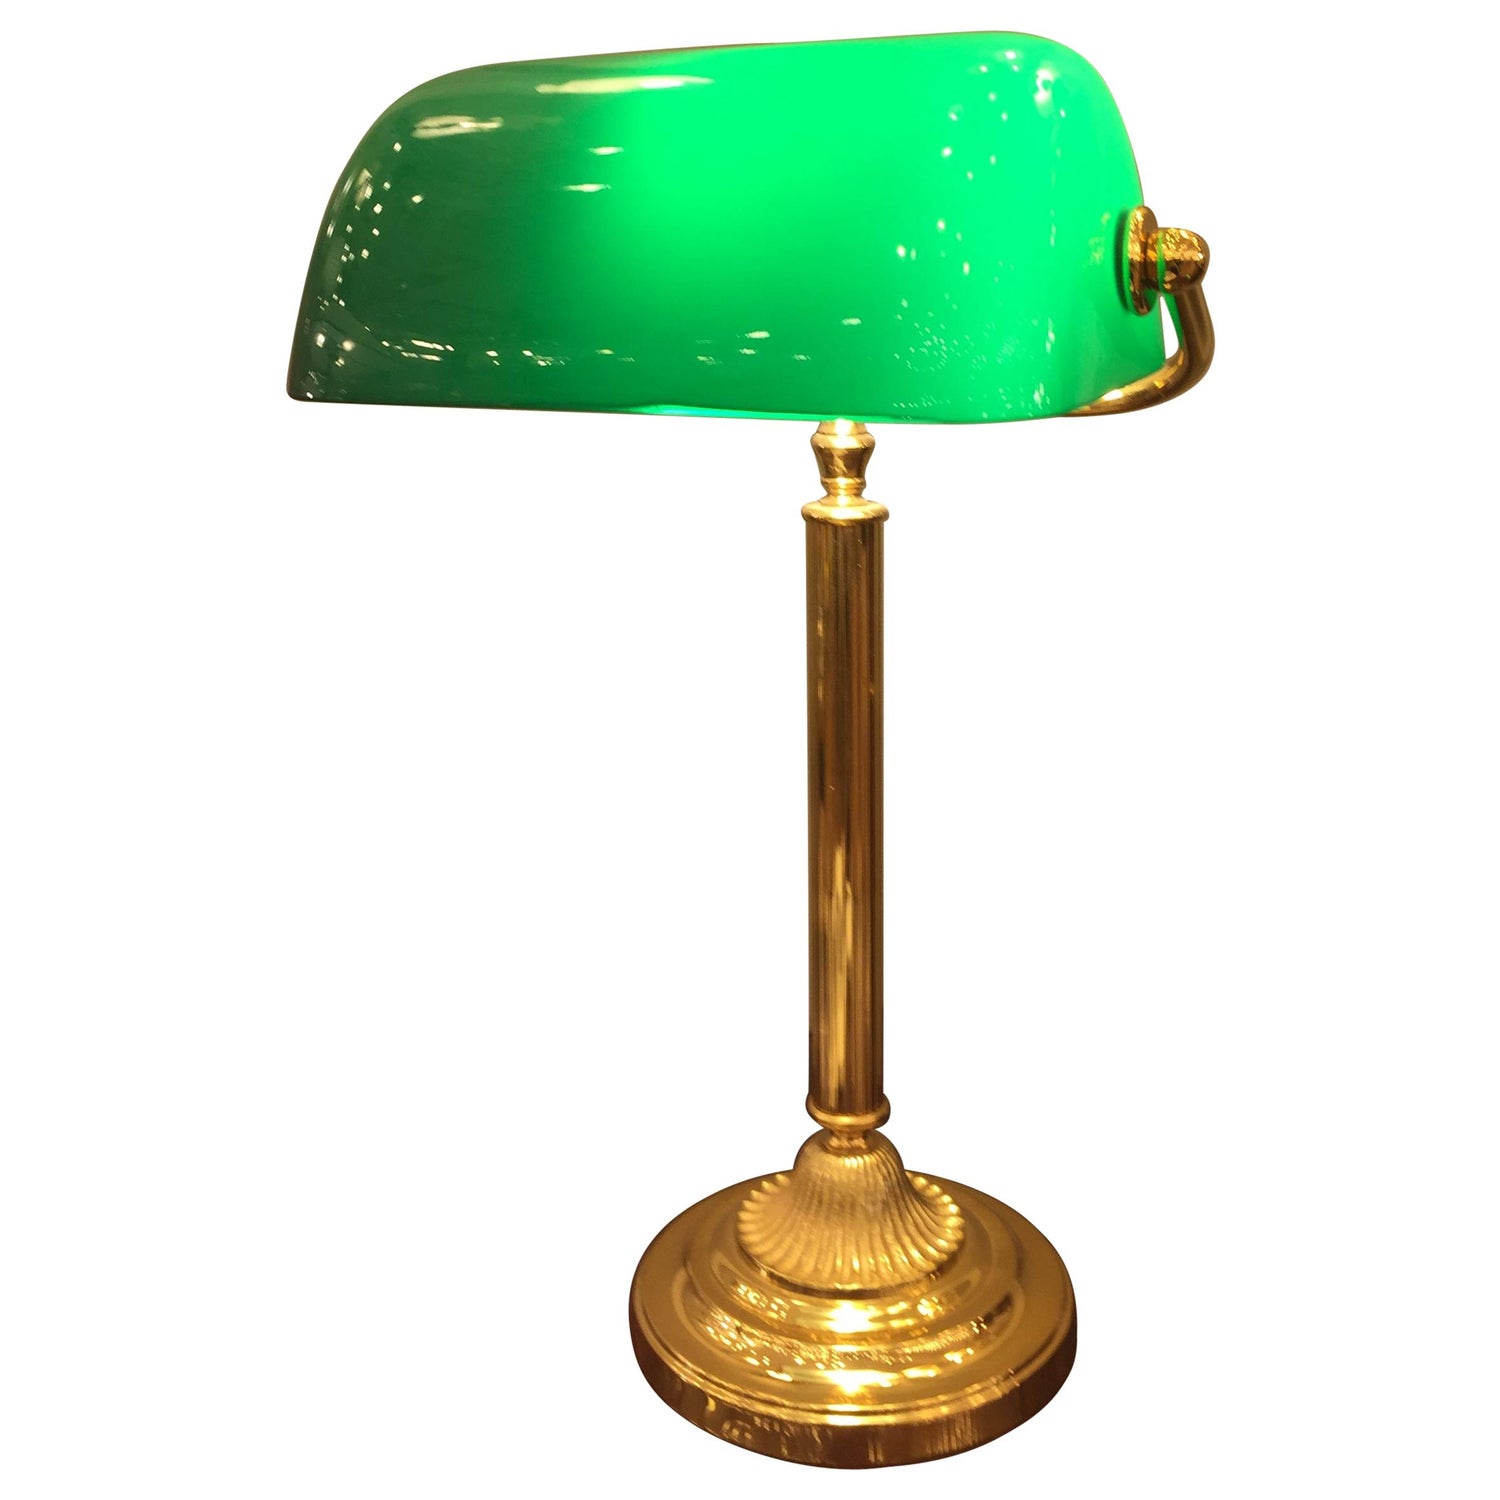 Antique Green Bankers Lamp - 7 For Sale on 1stDibs  green bankers lamp  vintage, green bankers lamp, vintage, vintage bankers lamp green